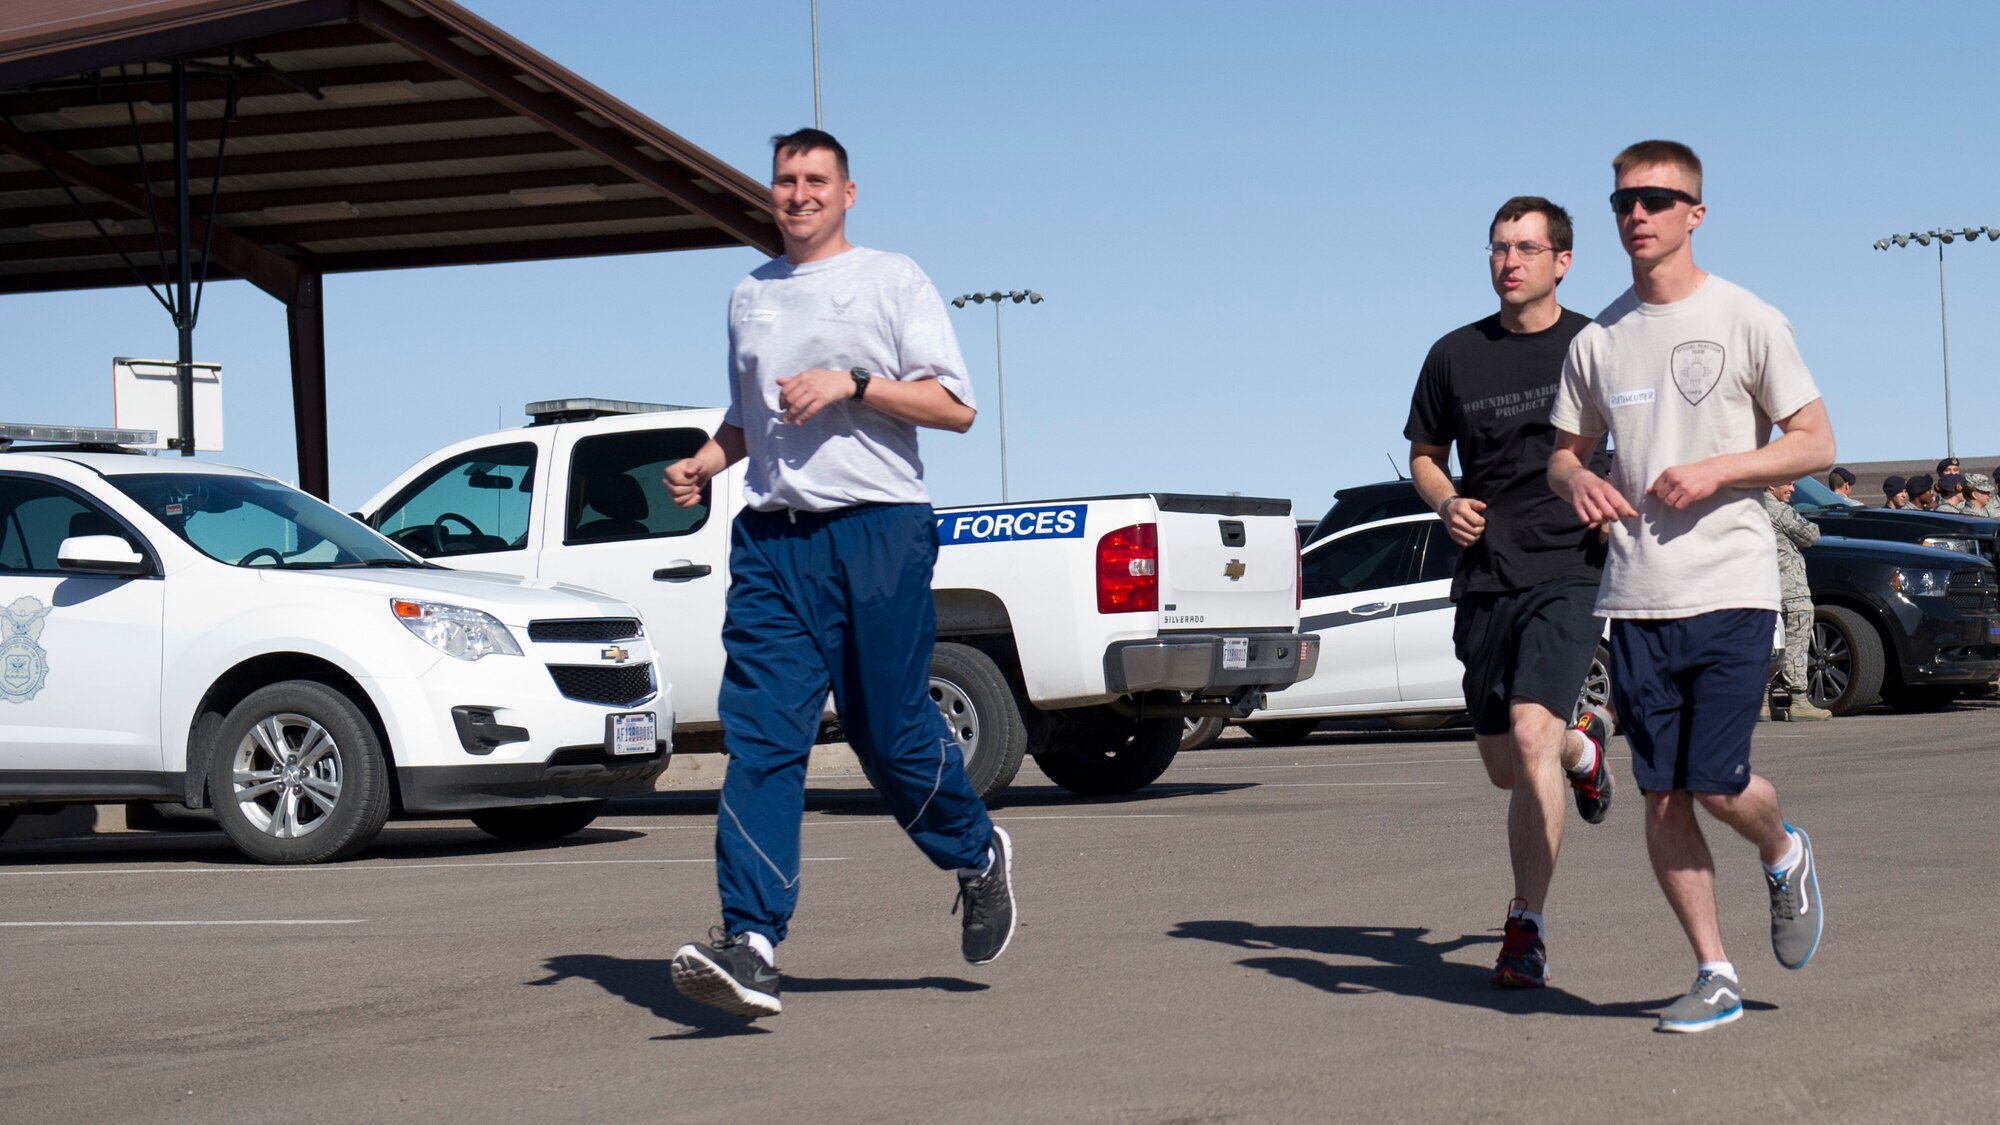 Master Sgt. Joshua Gressett, Staff Sgt. Jon Gally, and Staff Sgt. Nicholas Ruttencutter, members of the 49th Security Forces Squadron, begin their National Police Week 5K run at Holloman Air Force Base, N.M., May 12.  According to the National Police Week website, President John F.  Kennedy signed a proclamation in 1962 that designated May 15 as Peace Officers Memorial Day and the week in which that date falls as National Police Week.  Since the inception of National Police Week, the United States Air Force has lost 120 military and civilian law enforcement officers. (U.S. Air Force photo by Staff Sgt. E’Lysia Wray/Released)